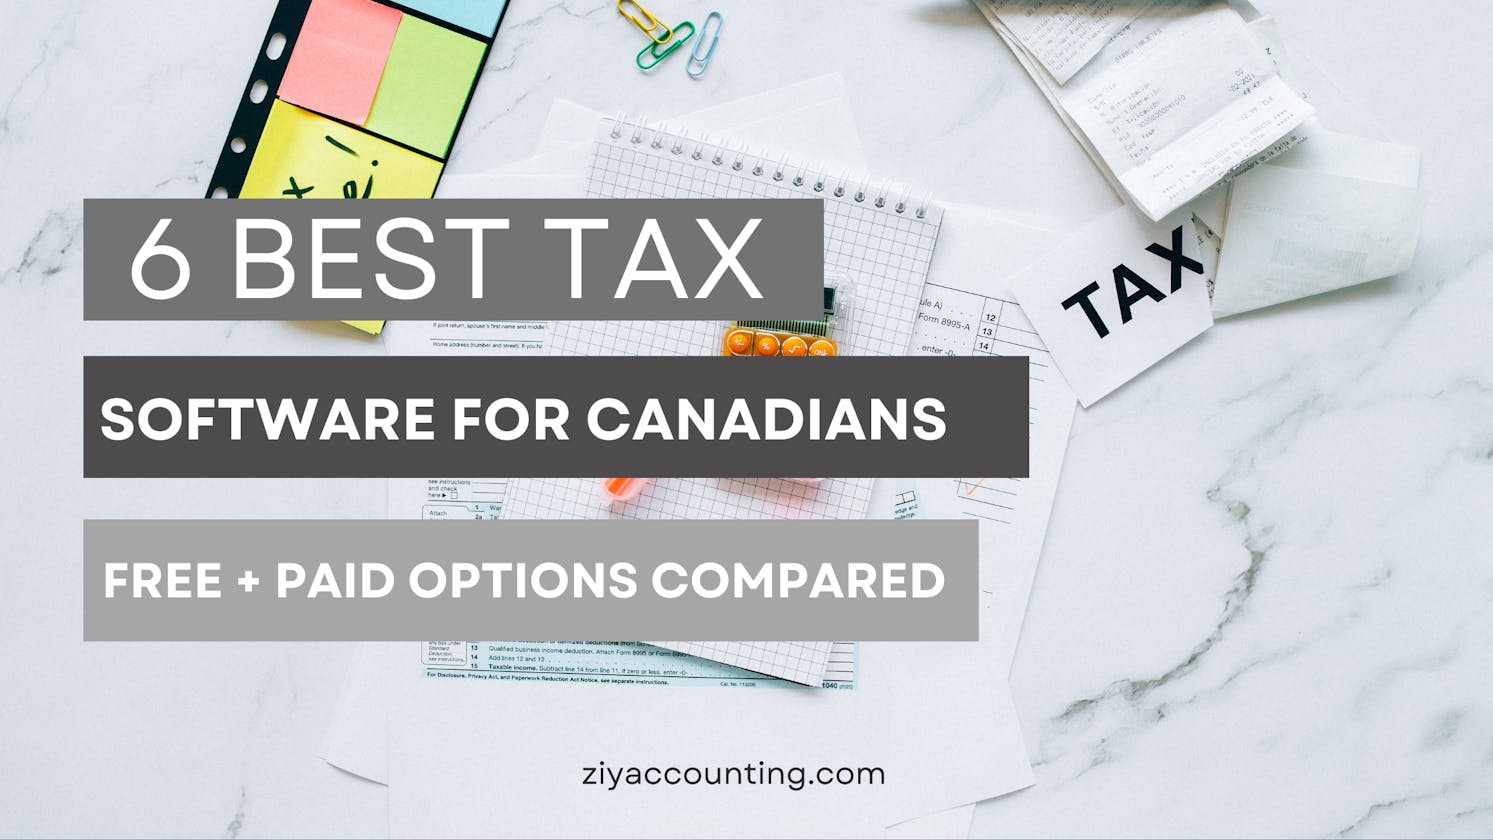 6 Best Tax Software for Canadians (Free + Paid Options Compared)